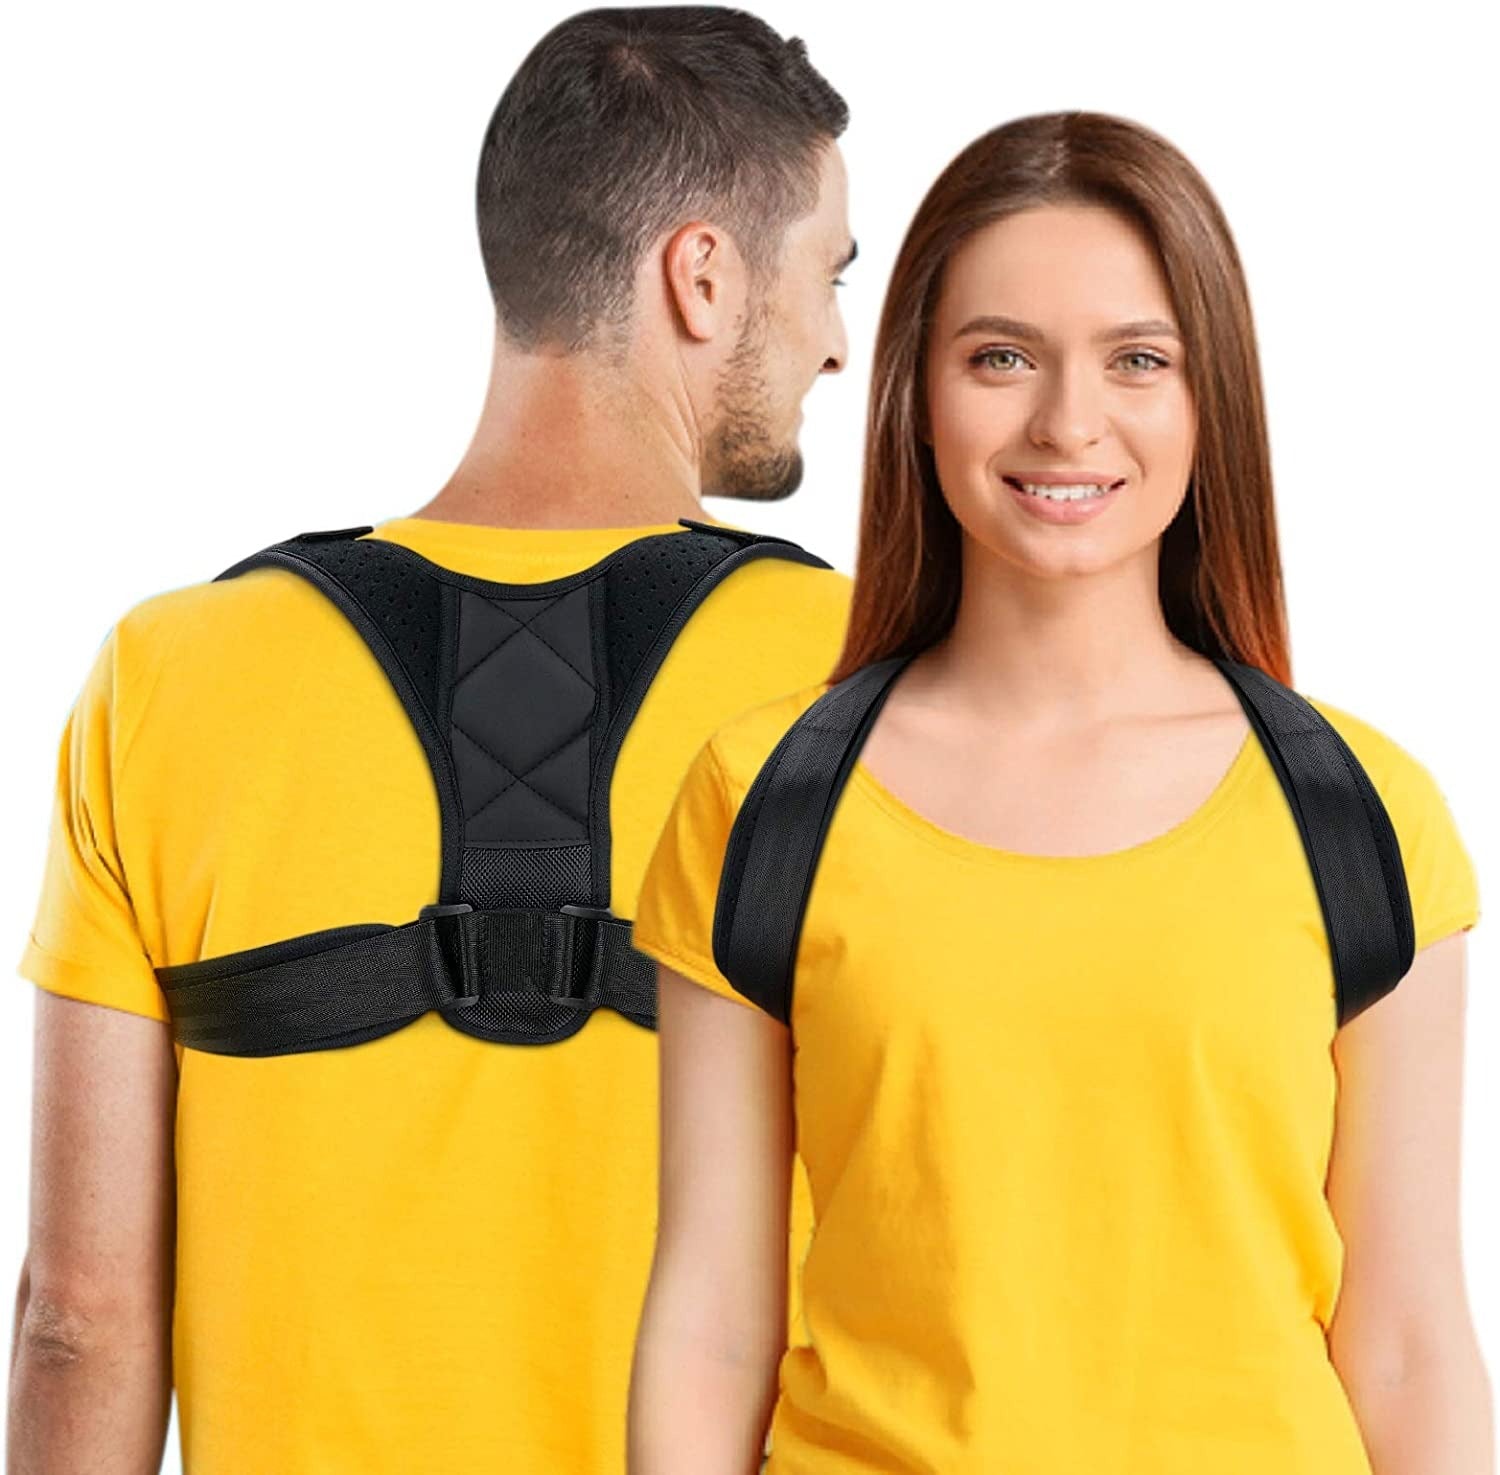 Belt to straighten the back and shoulders Posture correction straps